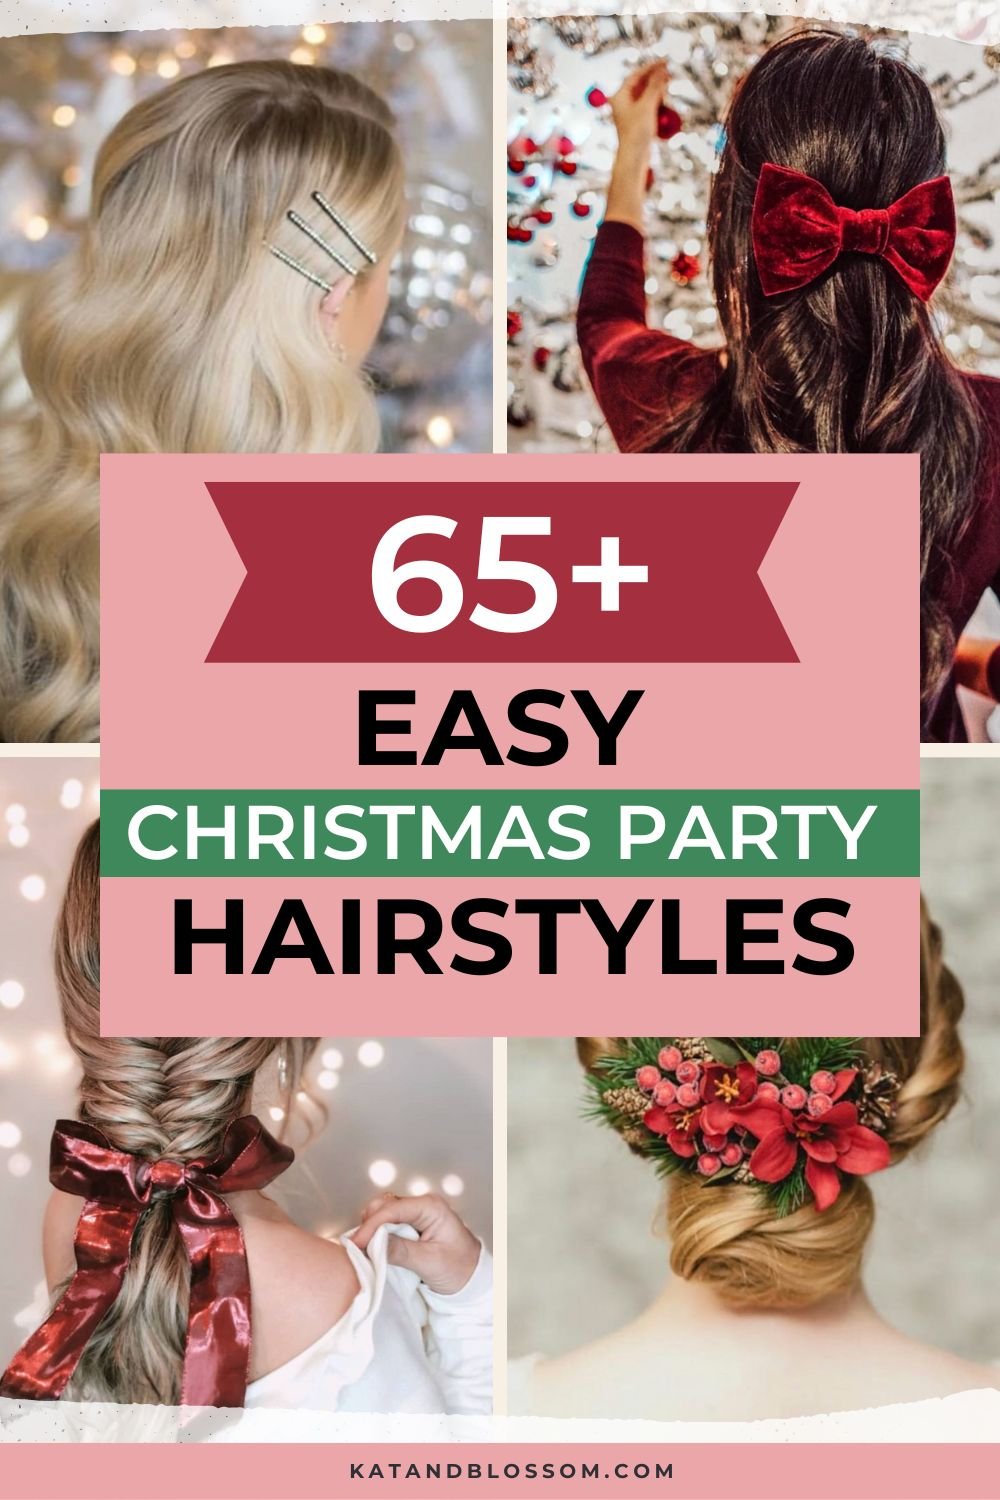 Easy Christmas Party Hairstyles Pinterest Cover KB